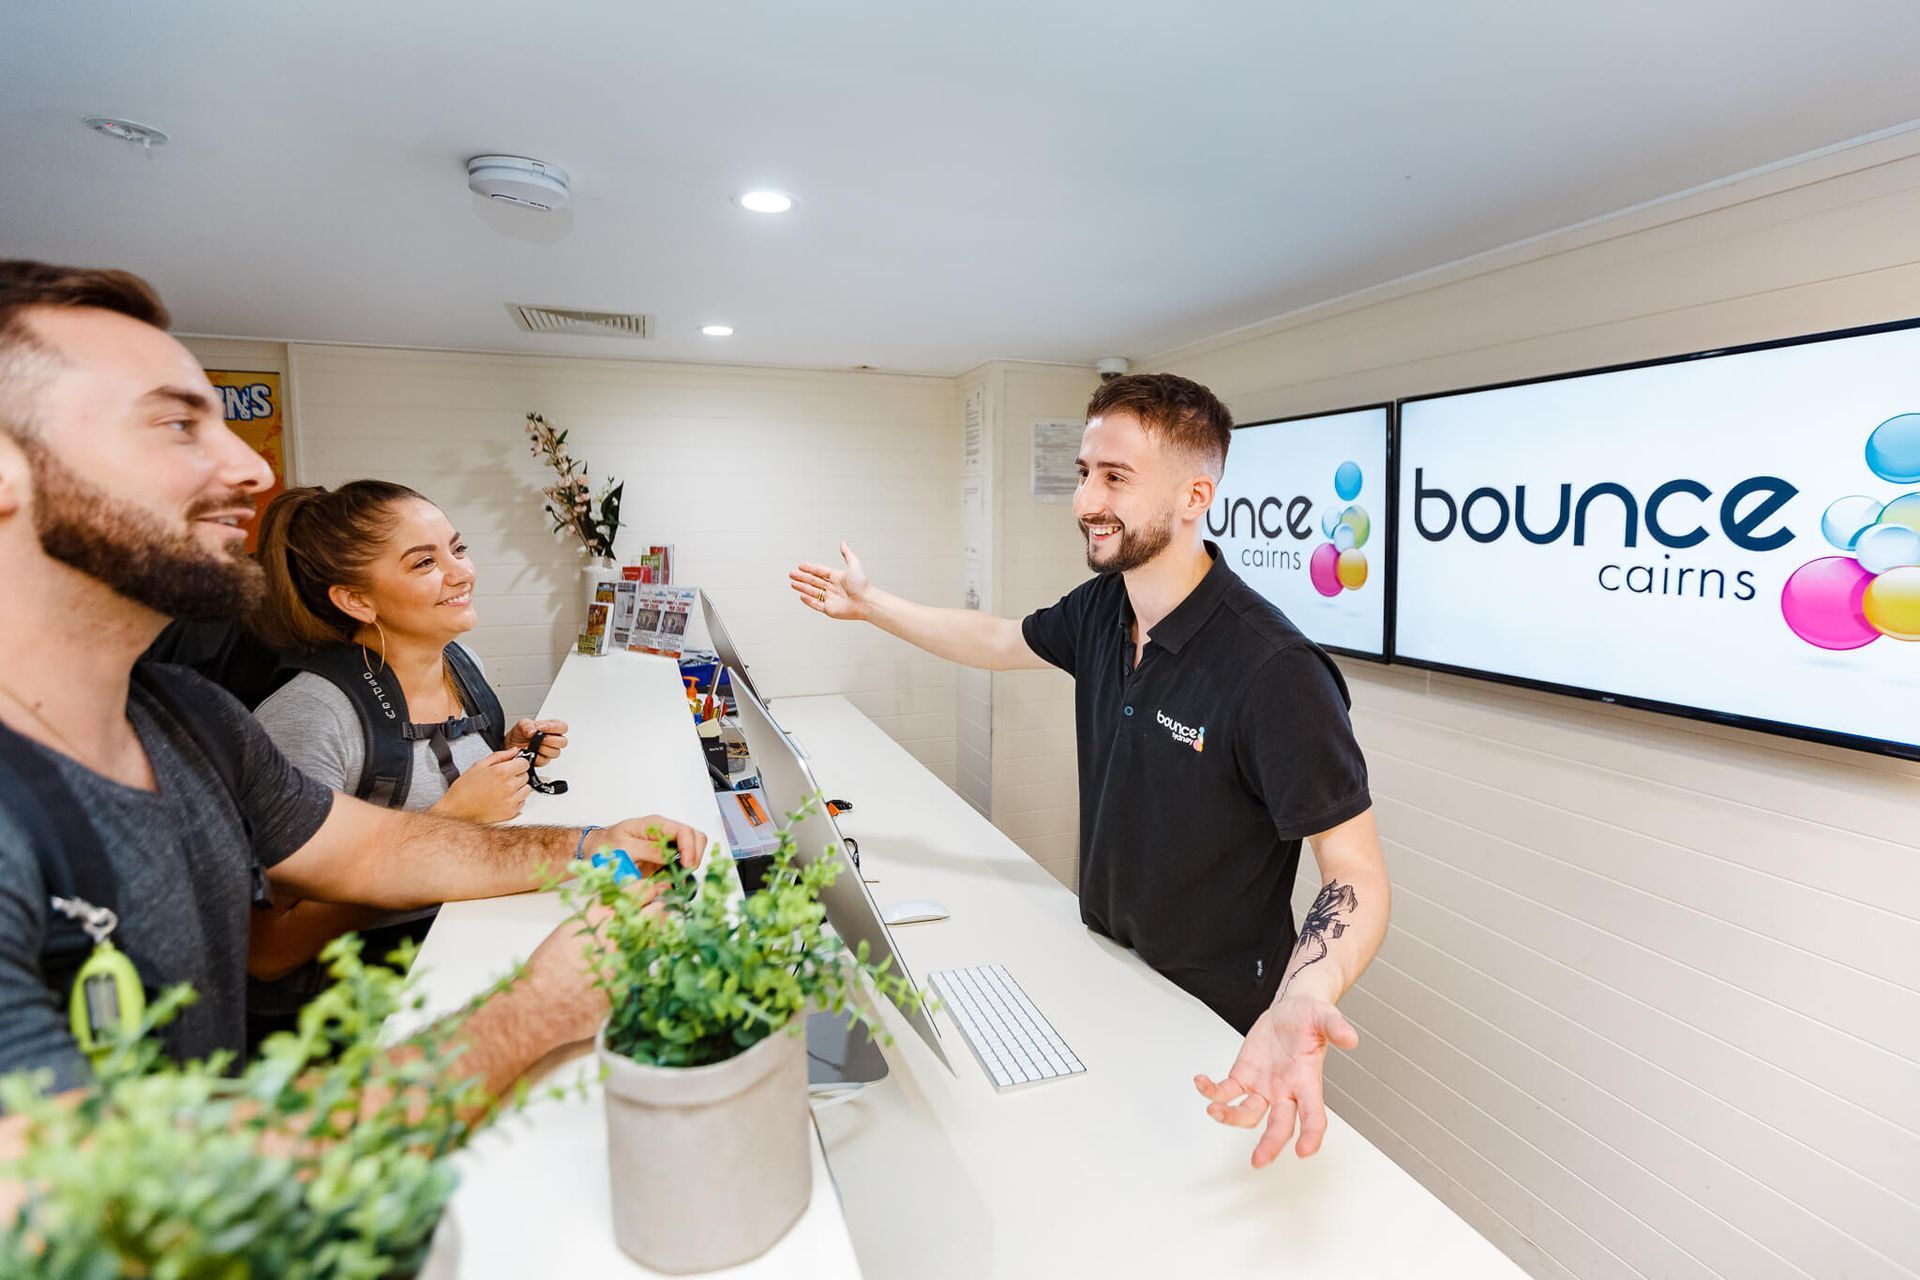 WELCOME TO BOUNCE CAIRNS